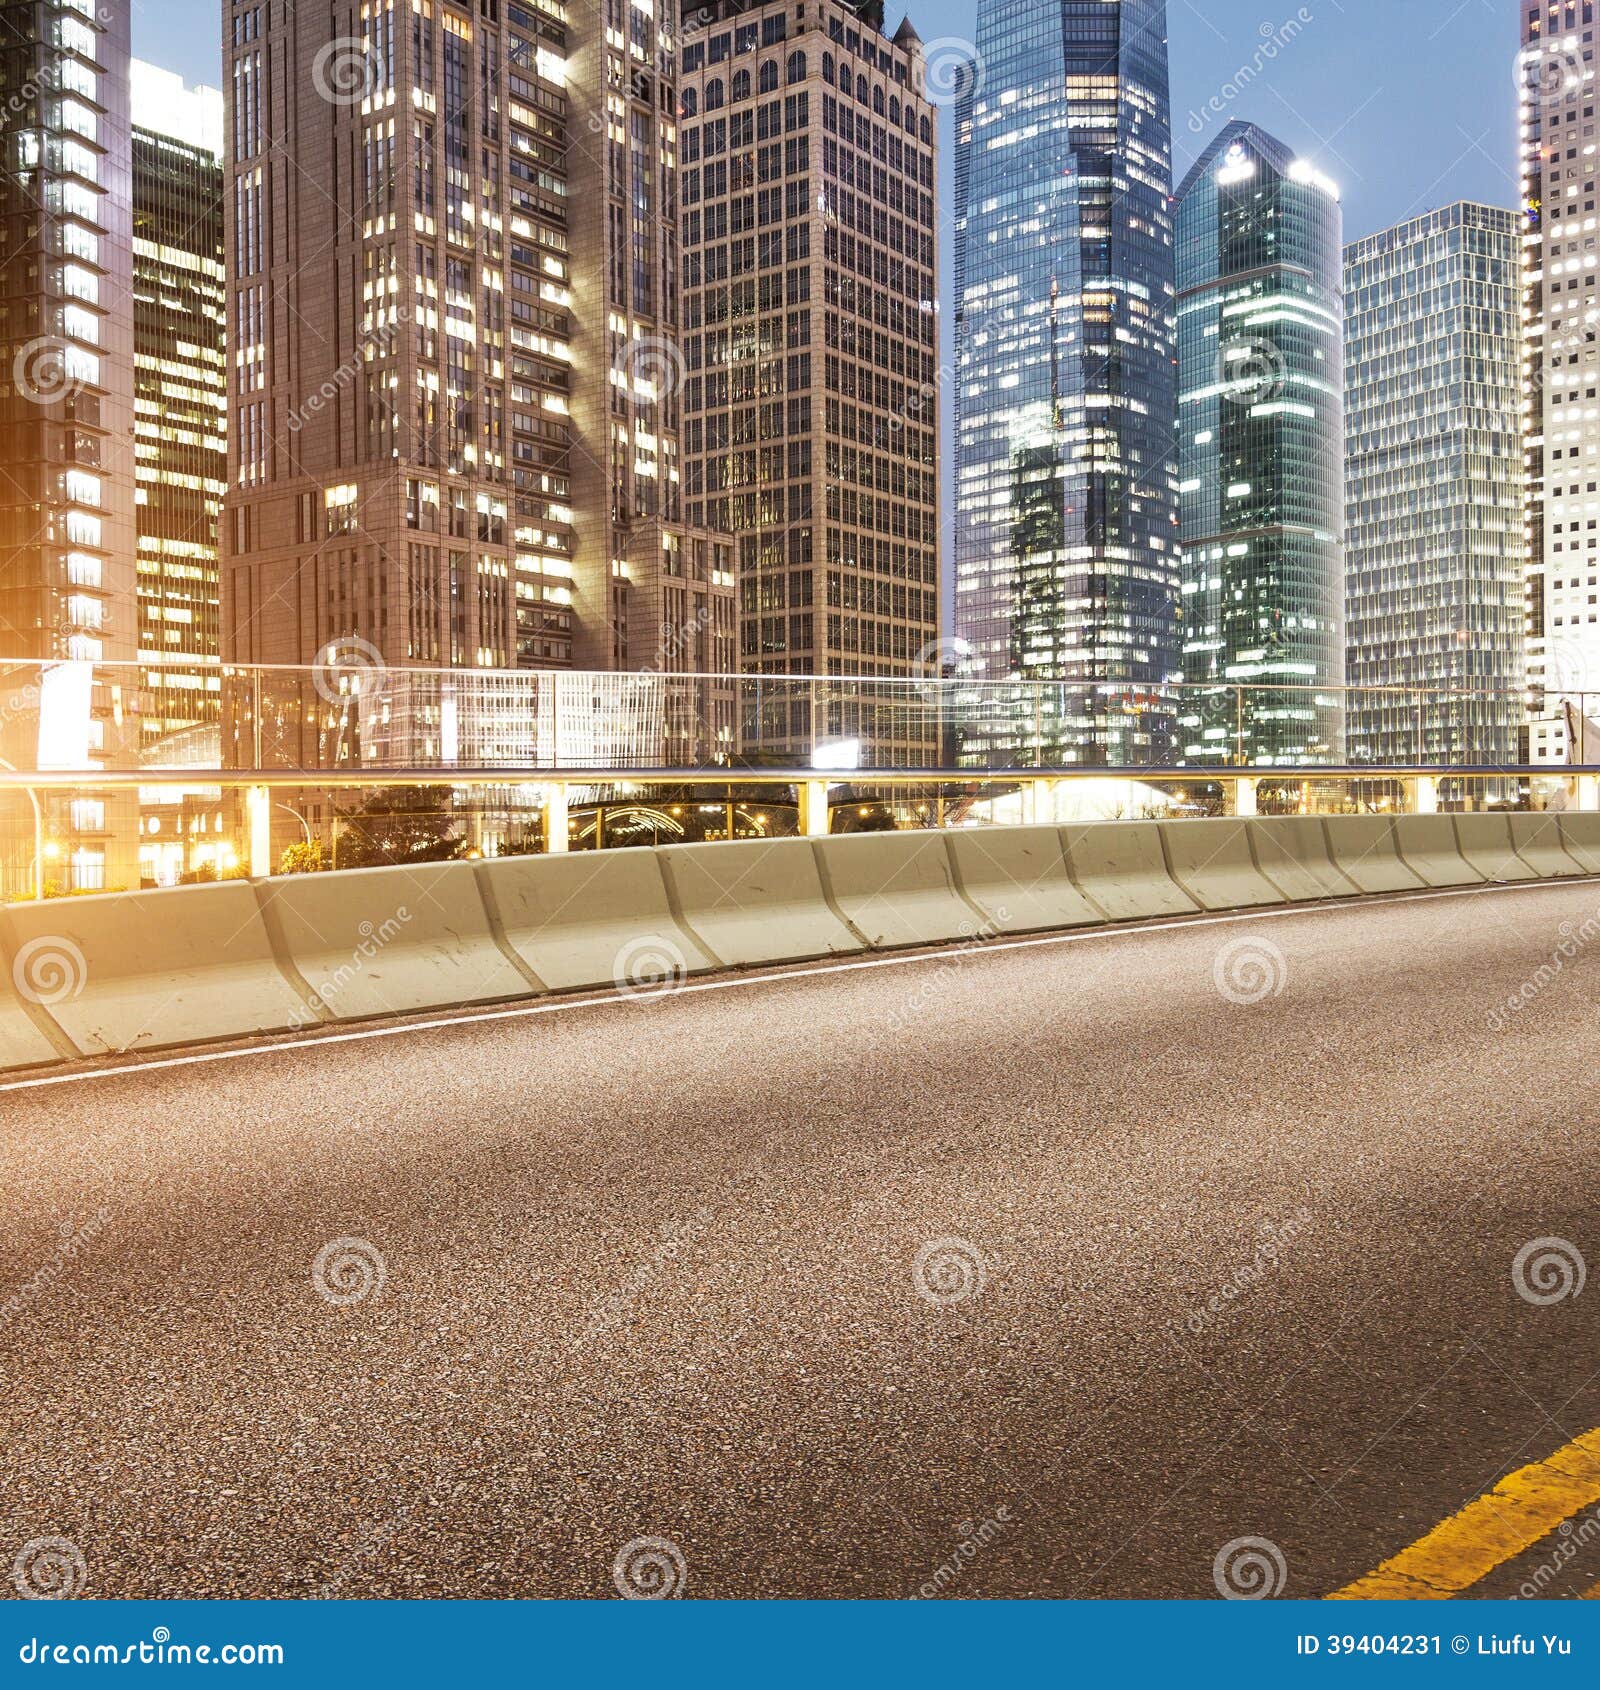 Road and city stock image. Image of landscape, district - 39404231